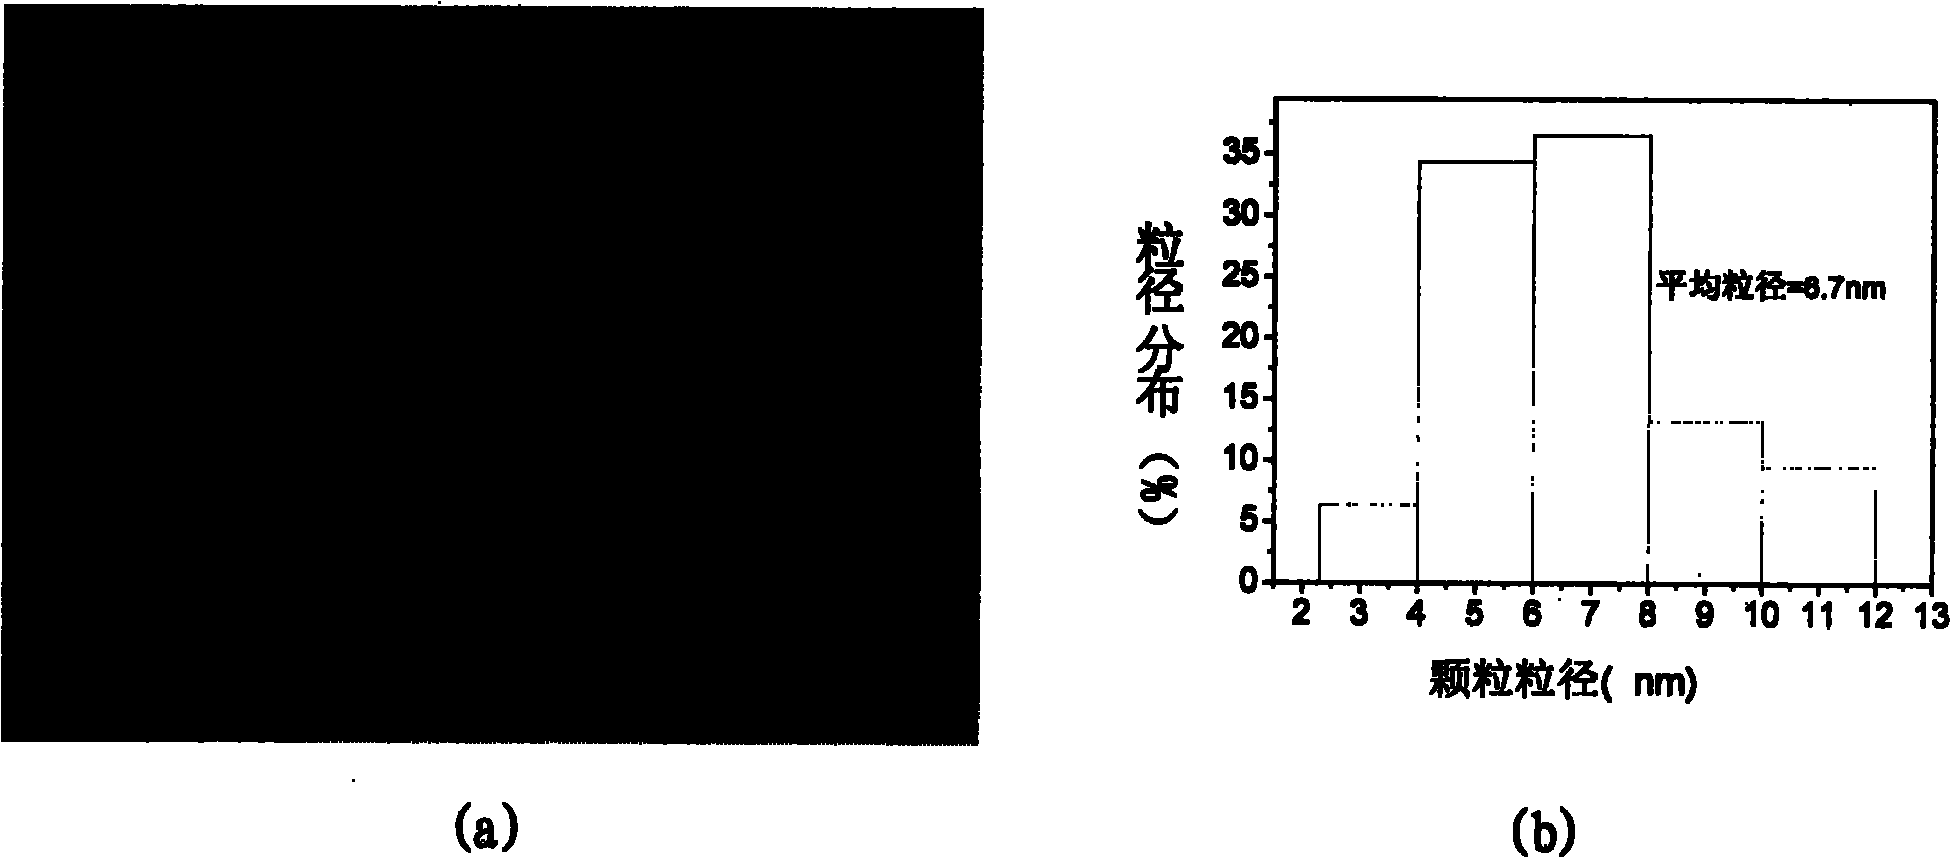 Method for preparing carboxyl polymeric copper phthalocyanine nanoparticles